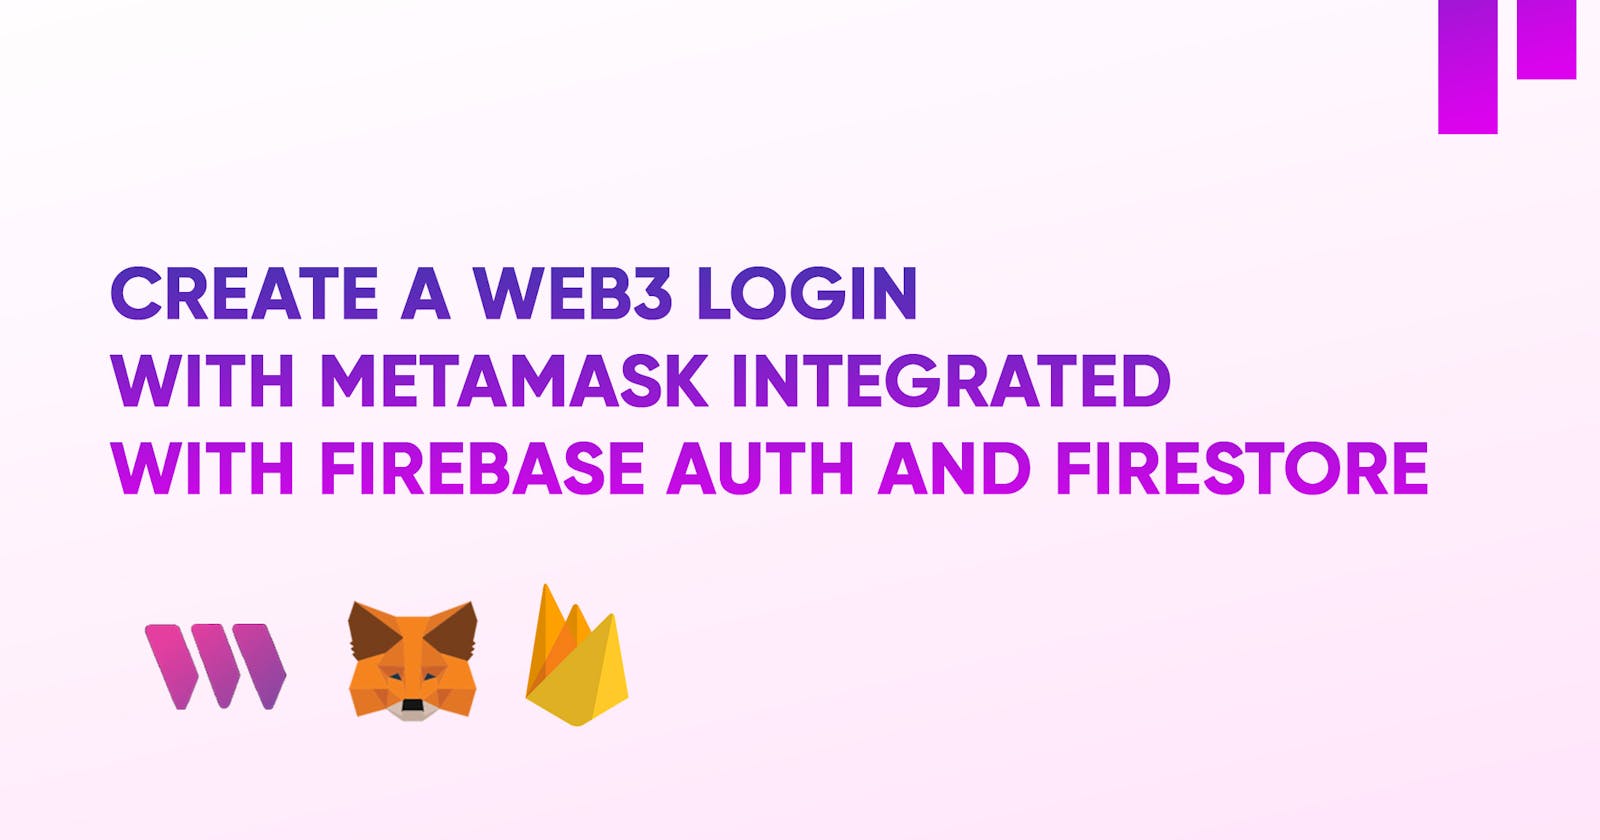 Create a Web3 Login with MetaMask Integrated with Firebase Auth and Firestore